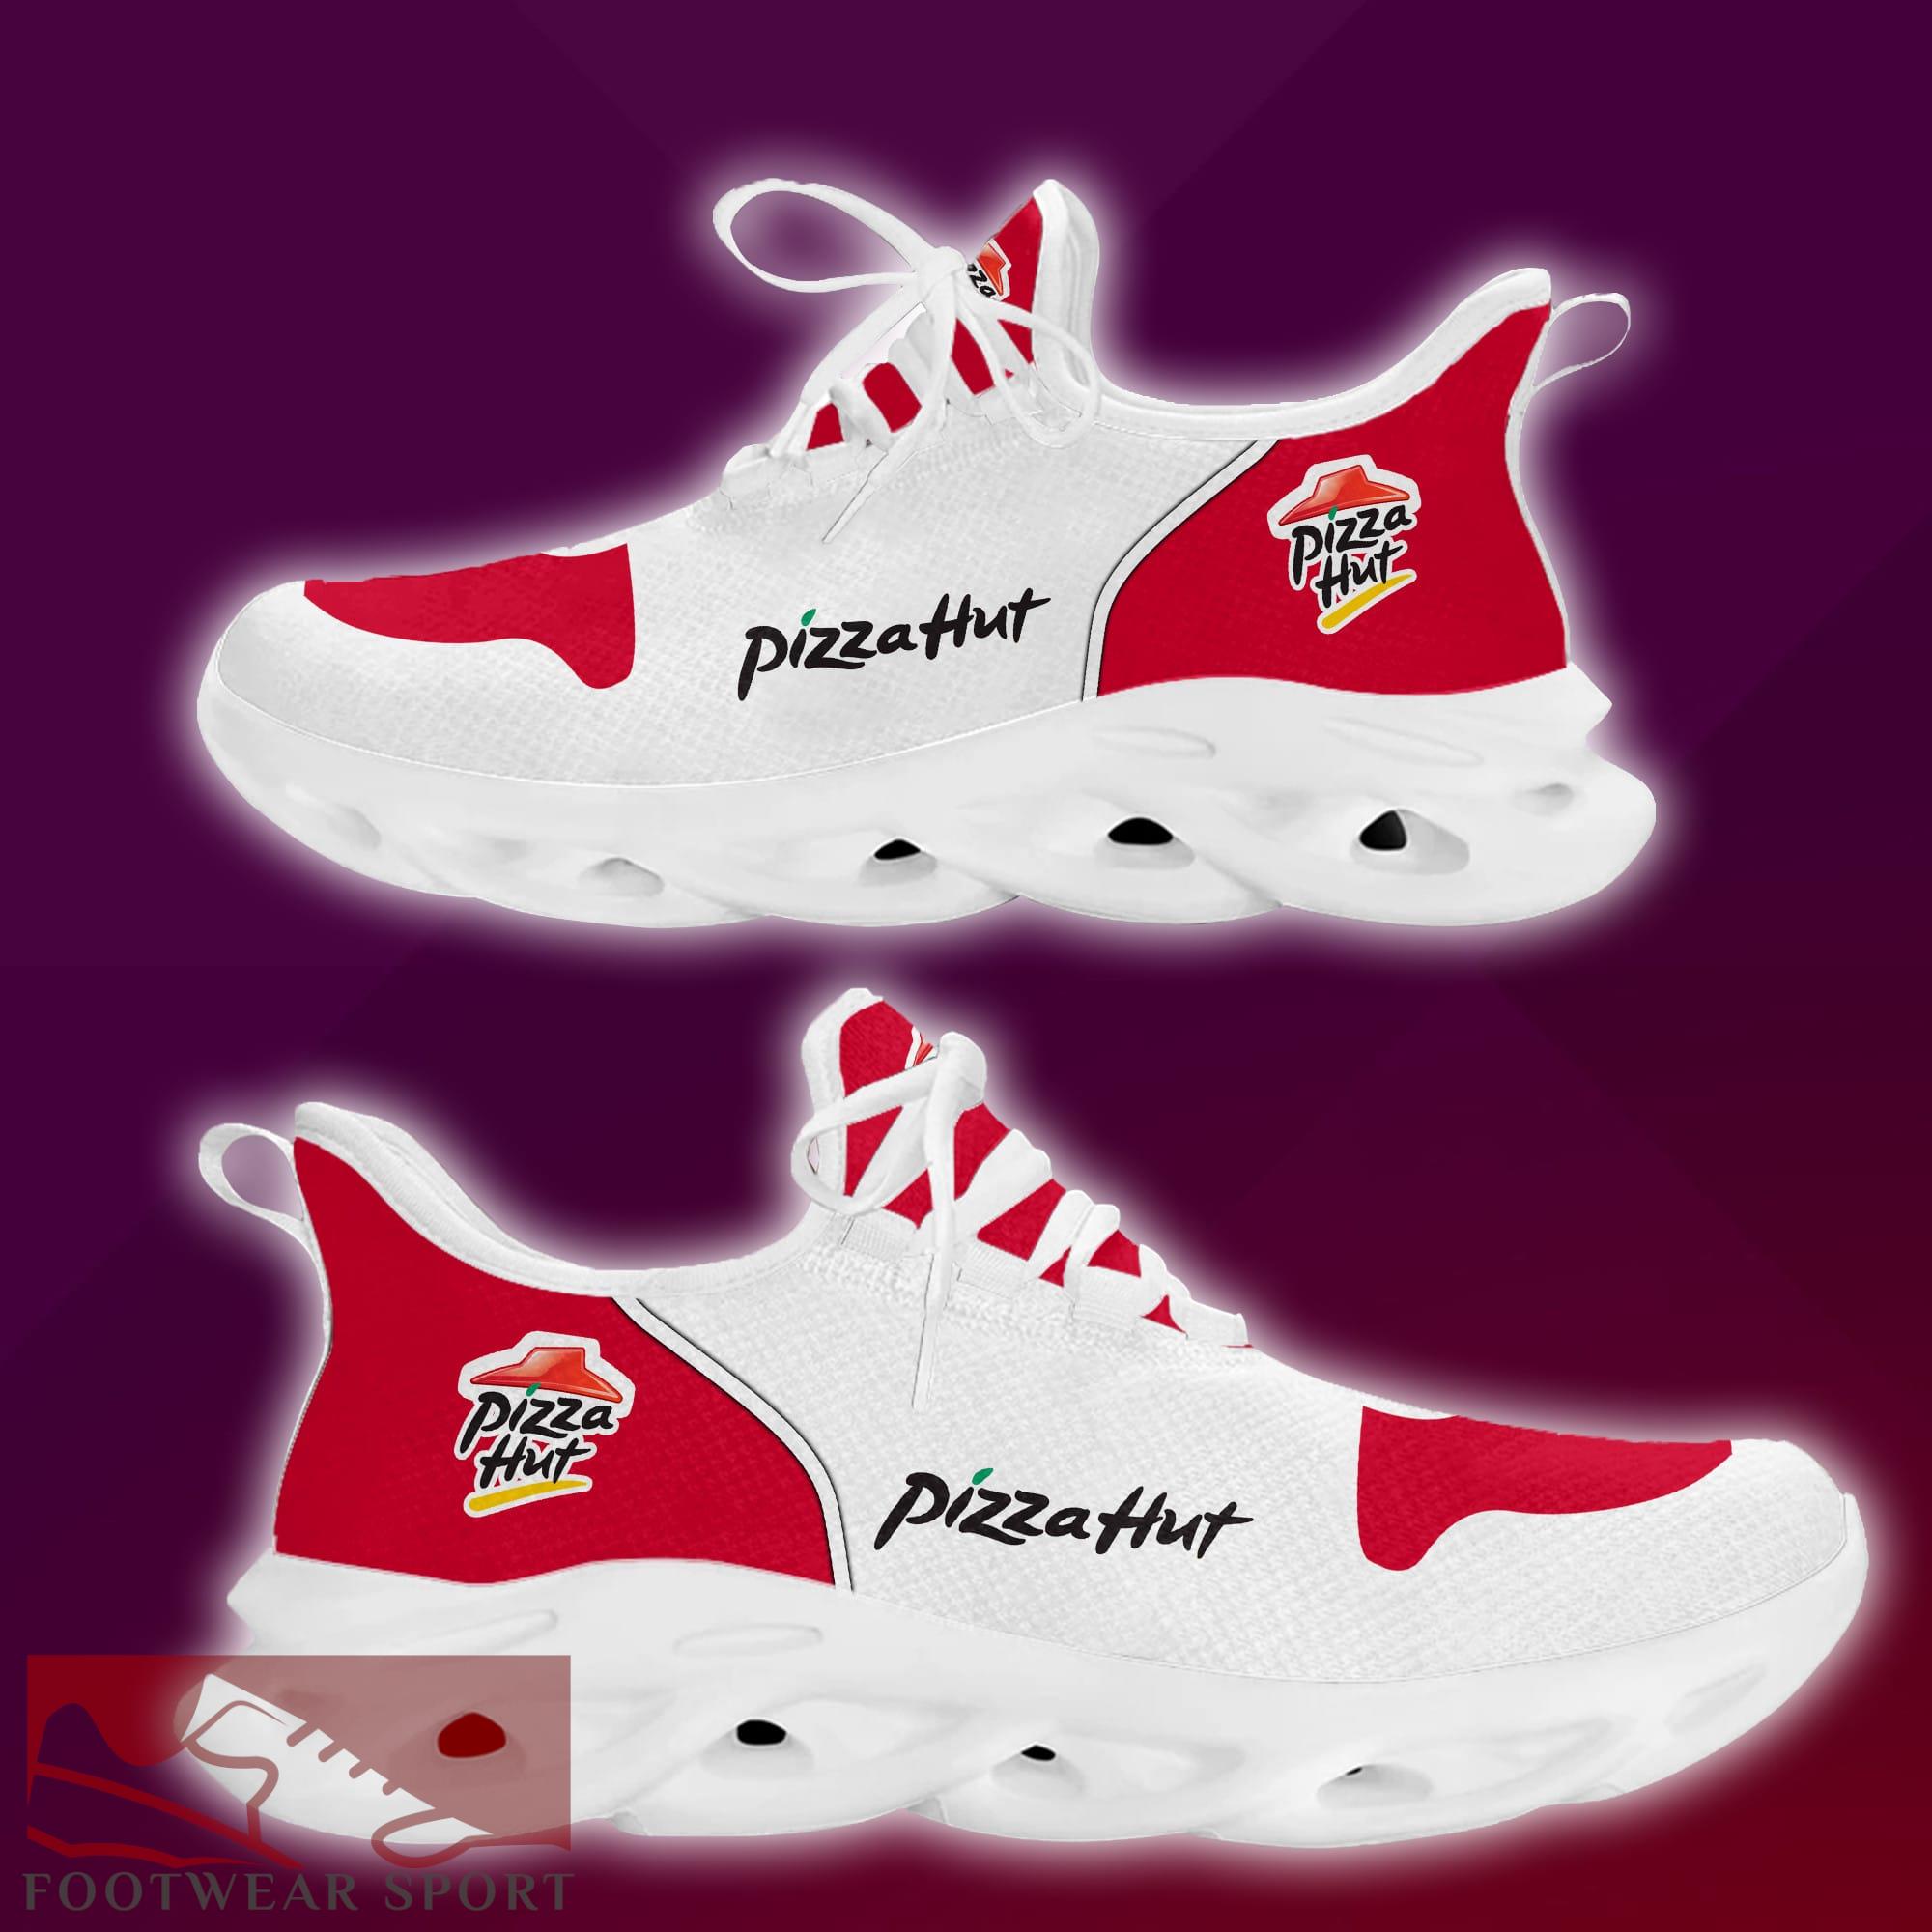 pizza hut Brand New Logo Max Soul Sneakers Casual Sport Shoes Gift - pizza hut New Brand Chunky Shoes Style Max Soul Sneakers Photo 2